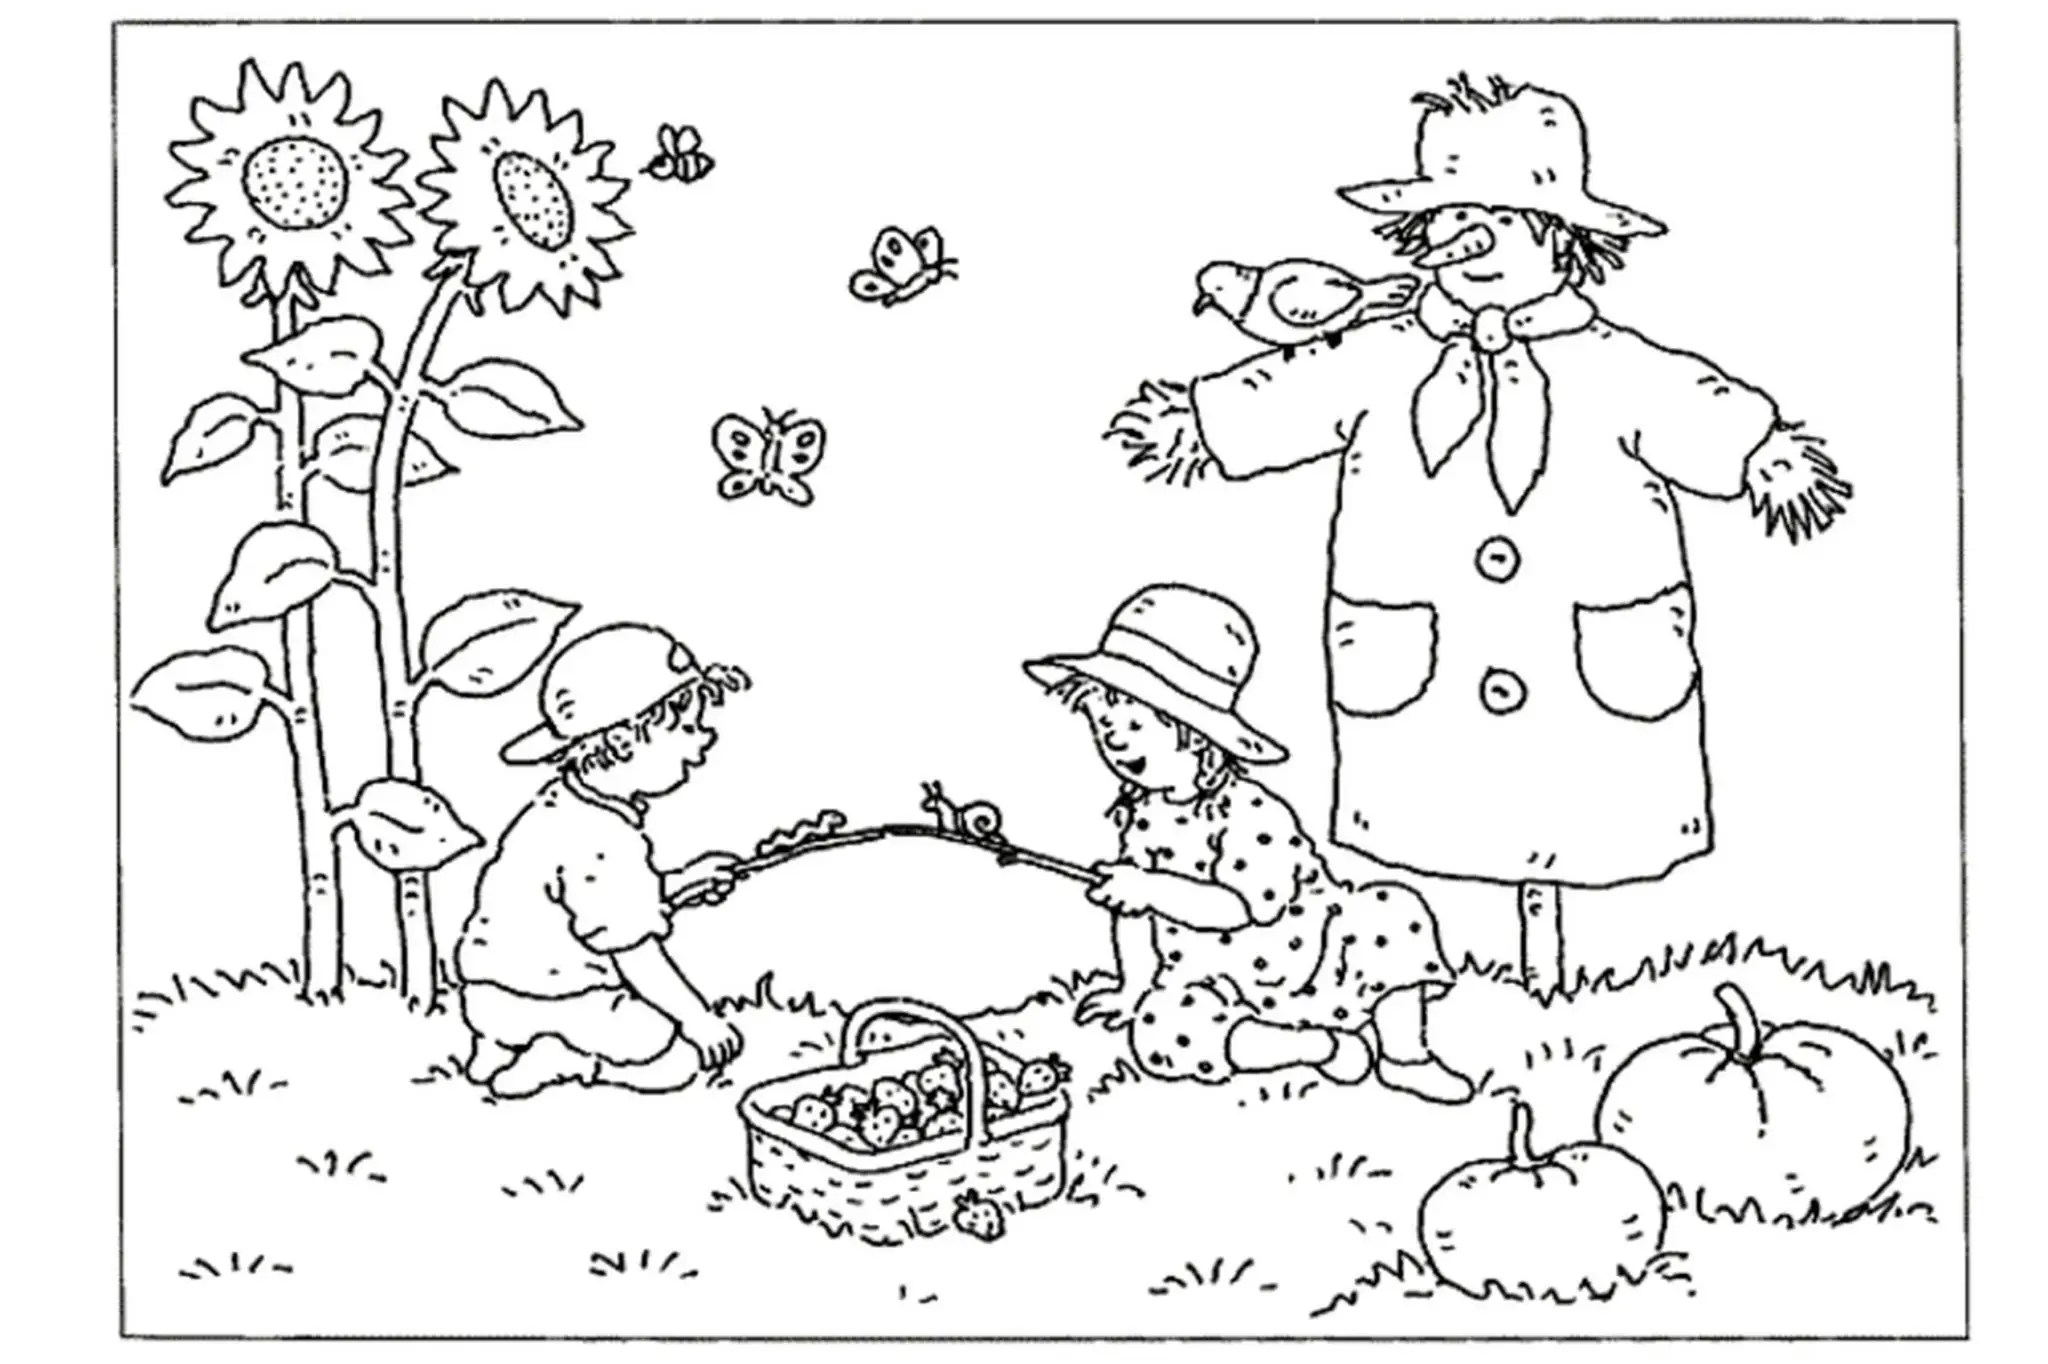 Print & Download - Fall Coloring Pages & Benefit of Coloring for Kids